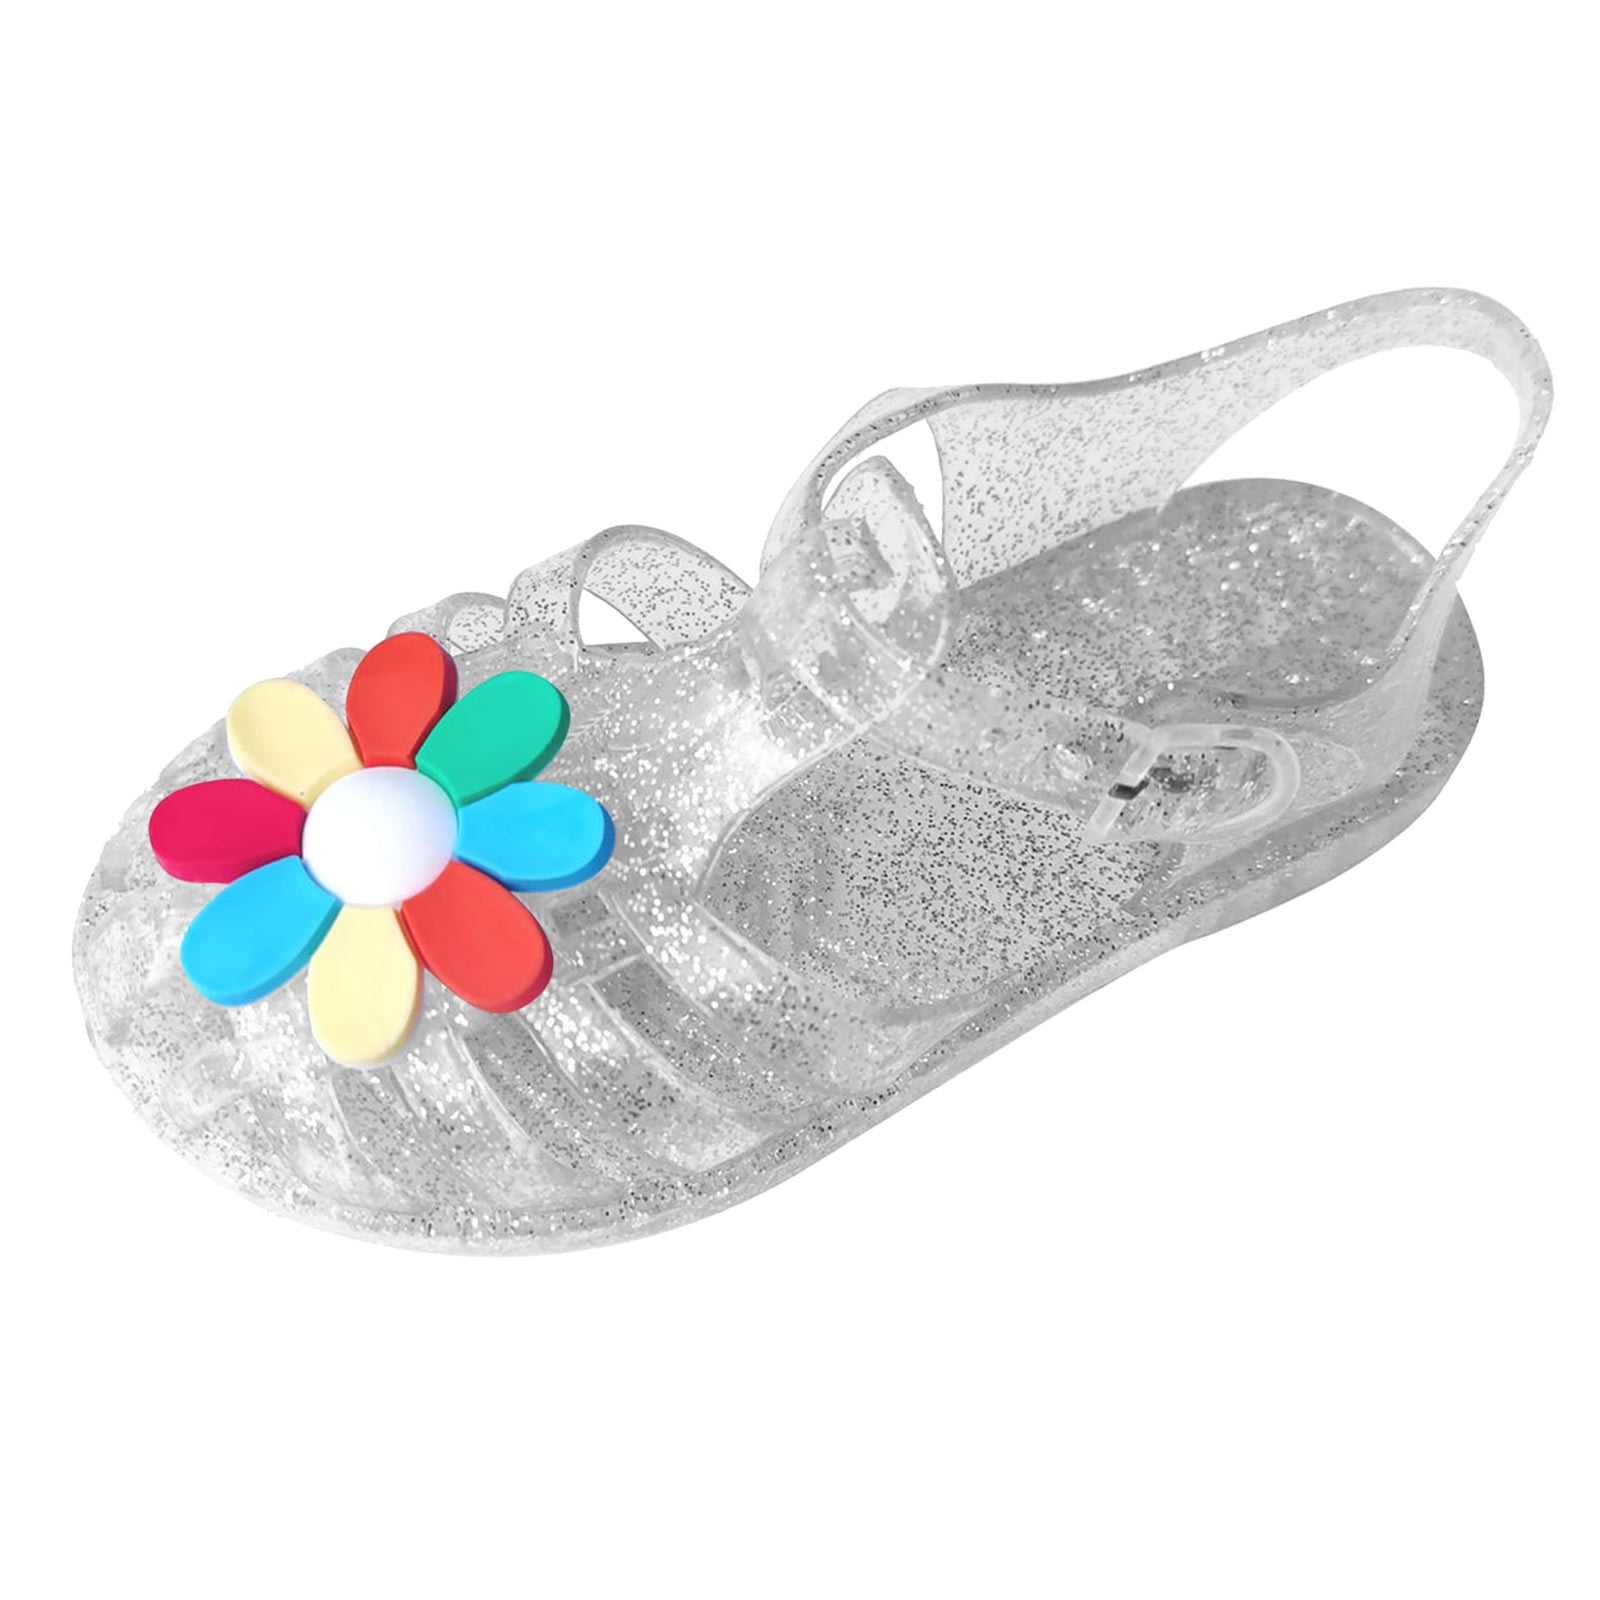 Lovskoo Little Girls Jelly Sandal for 5-6 Years Old Hollow Out Non-slip  Cute Fruit Soft Sole Beach Roman Sandals White 